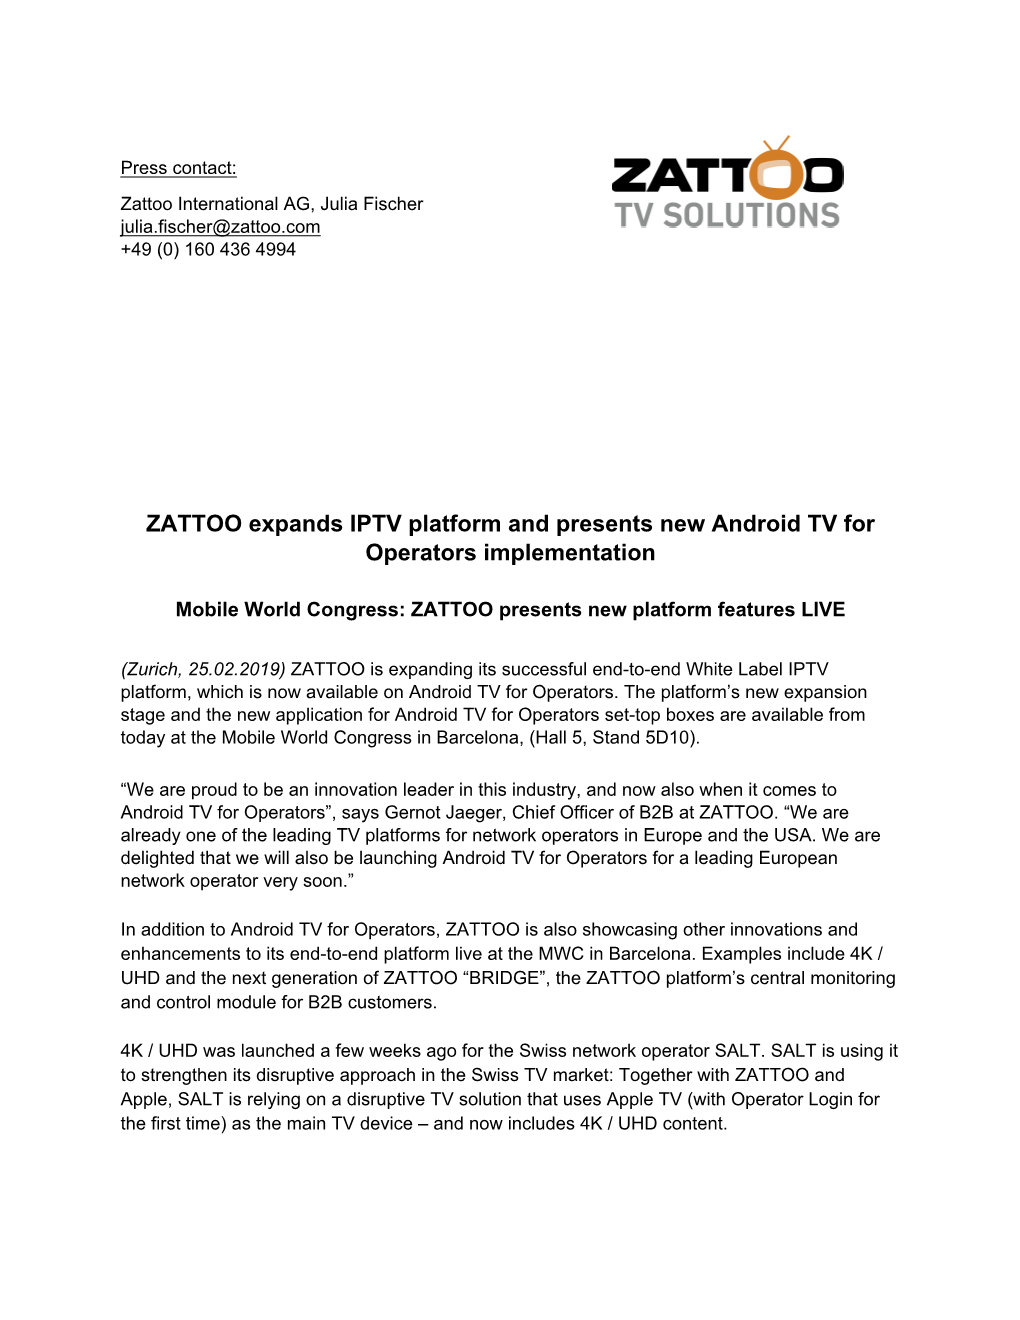 ZATTOO Expands IPTV Platform and Presents New Android TV for Operators Implementation